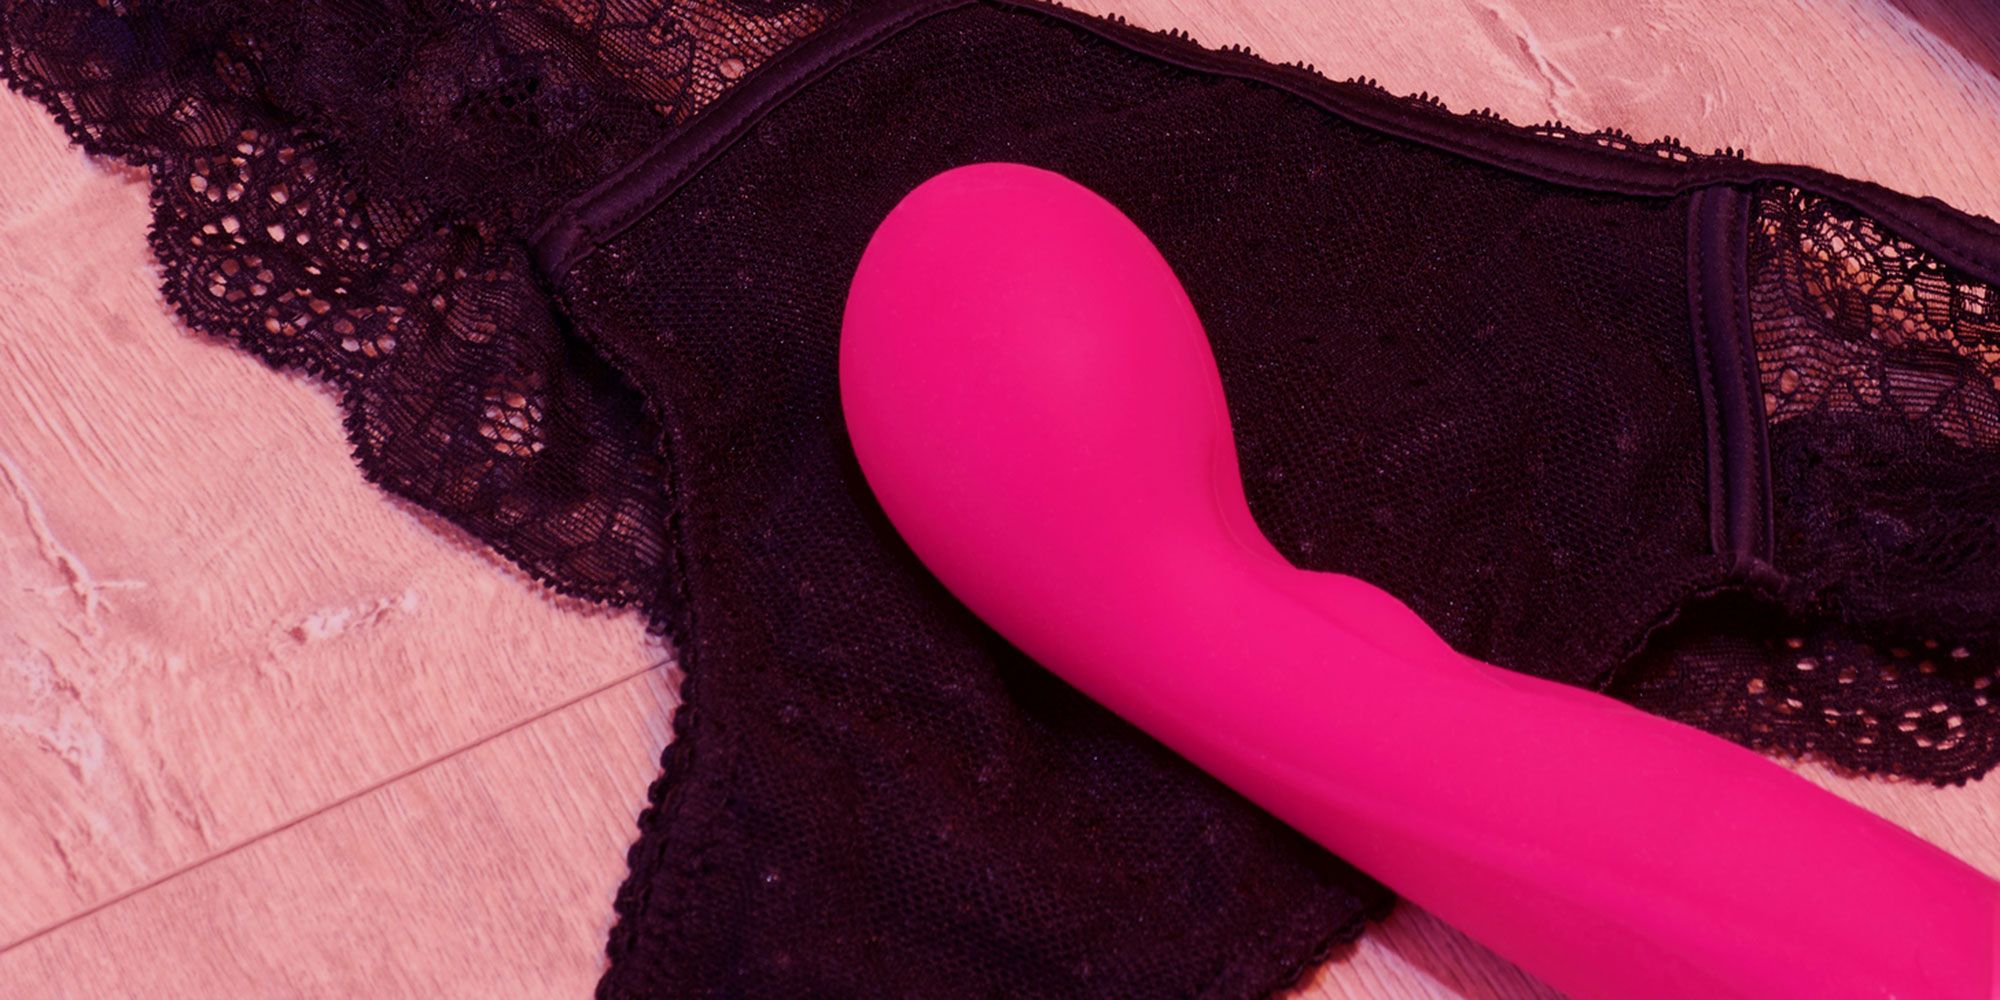 8 sex toy stories thatll make you physically cringe